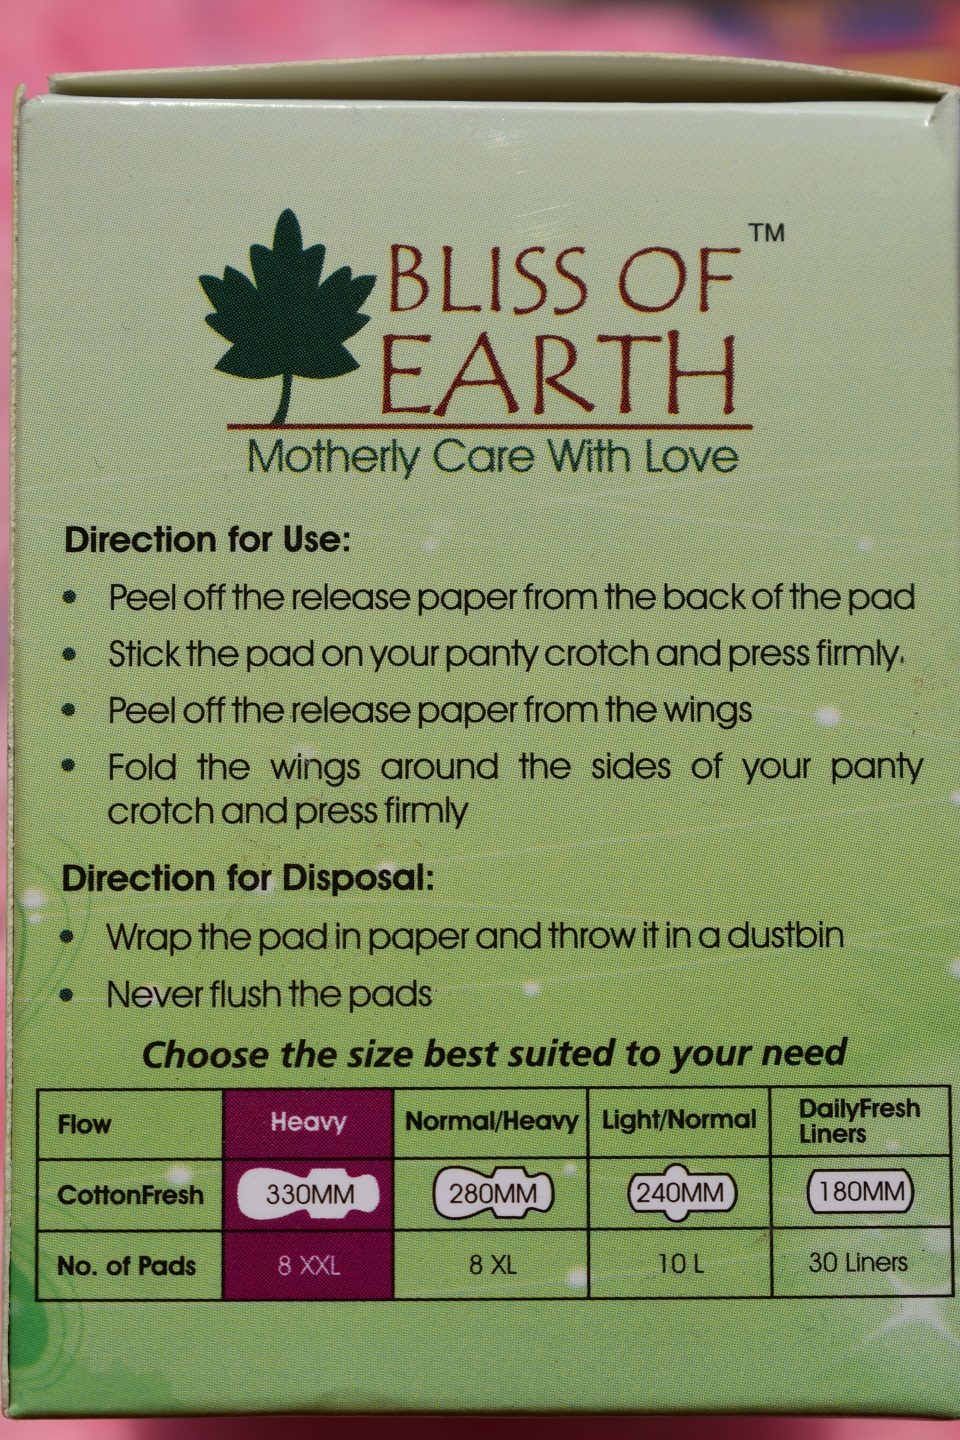 Bliss Of Earth CottonFresh Sanitary Napkin - How To Use